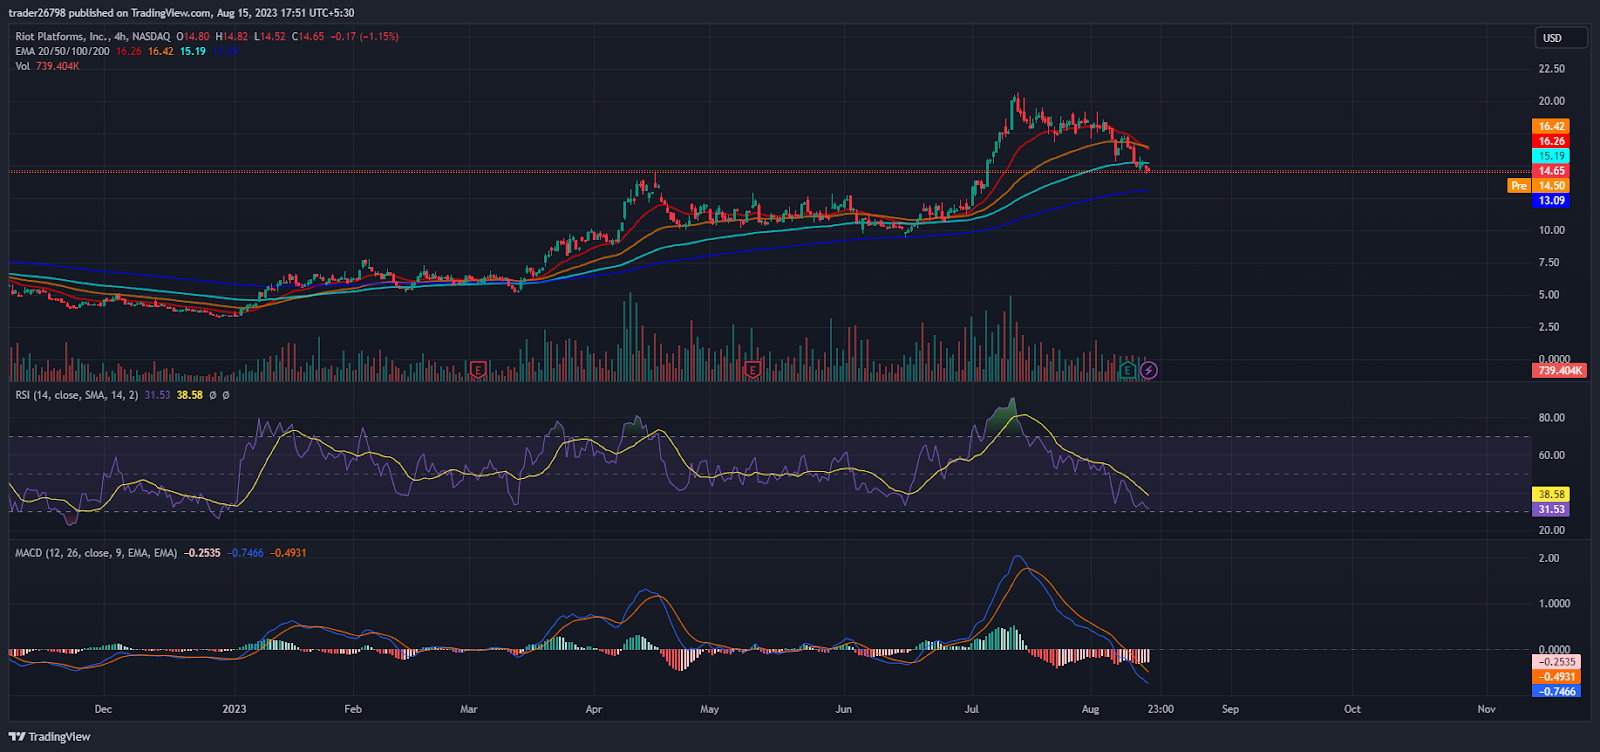 Will RIOT Platforms (RIOT Stock) Rebound From 50-Day EMA?